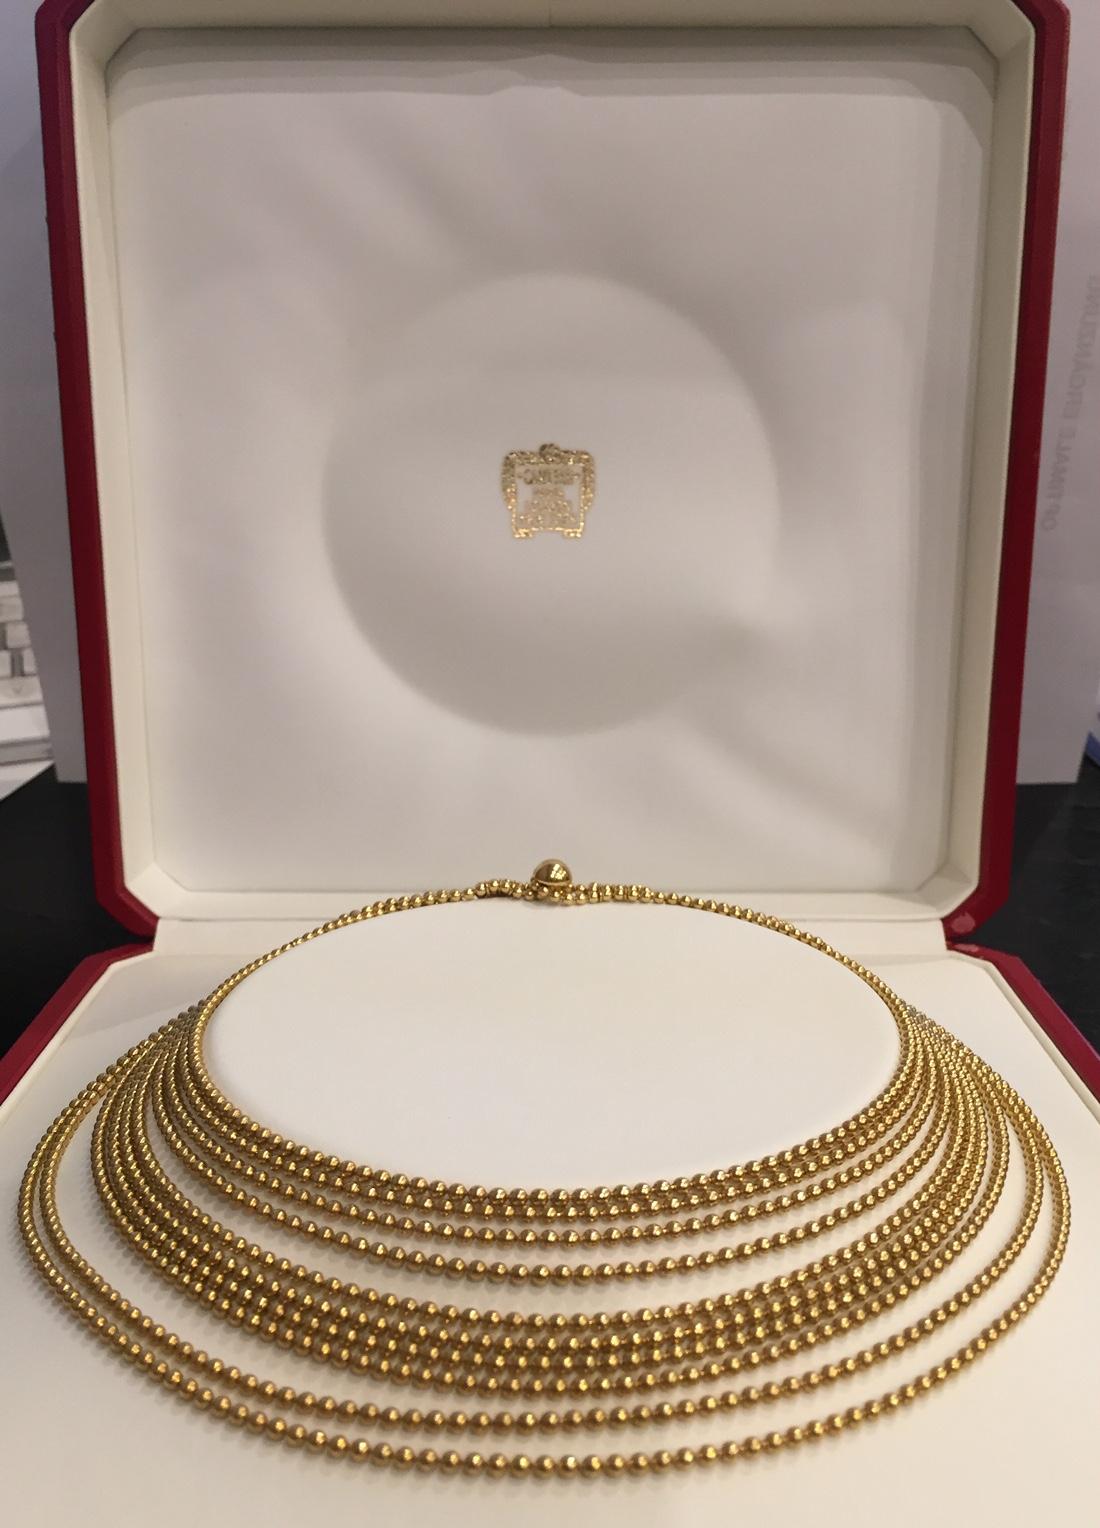 Cartier Draperie Necklace in 18 K, beautifully crafted in high polish yellow gold, the ten stranded gold bead necklace graduates in length from the top to the bottom strand. This estate signed designer Cartier draperie necklace is a timeless classic